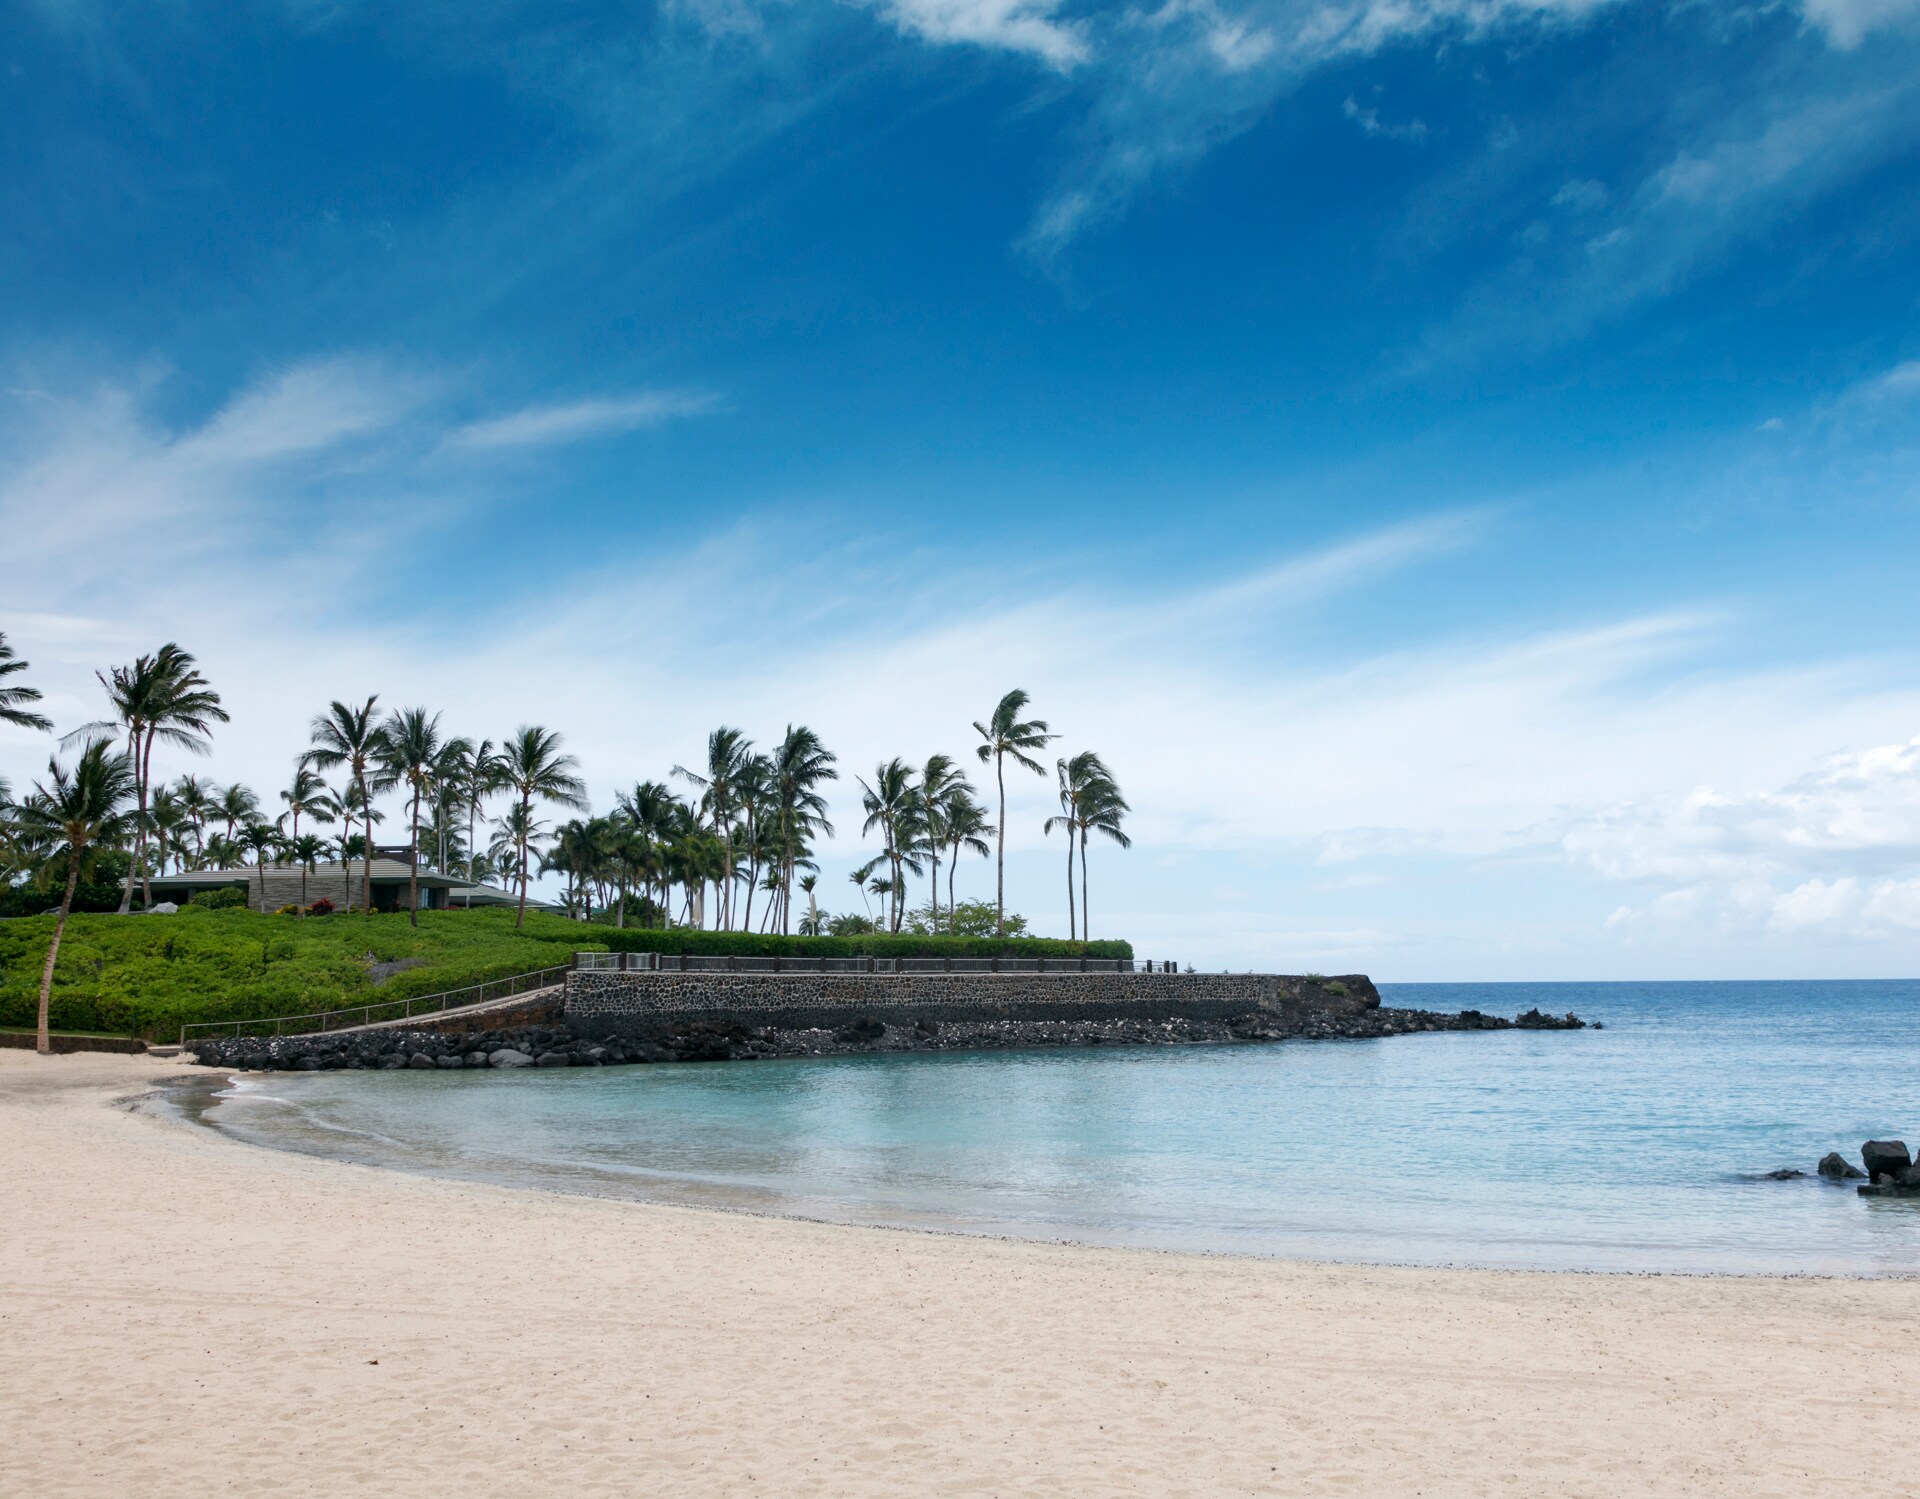 Enjoy Free access to the Mauna Lani Private Beach Club - Great snorkeling!